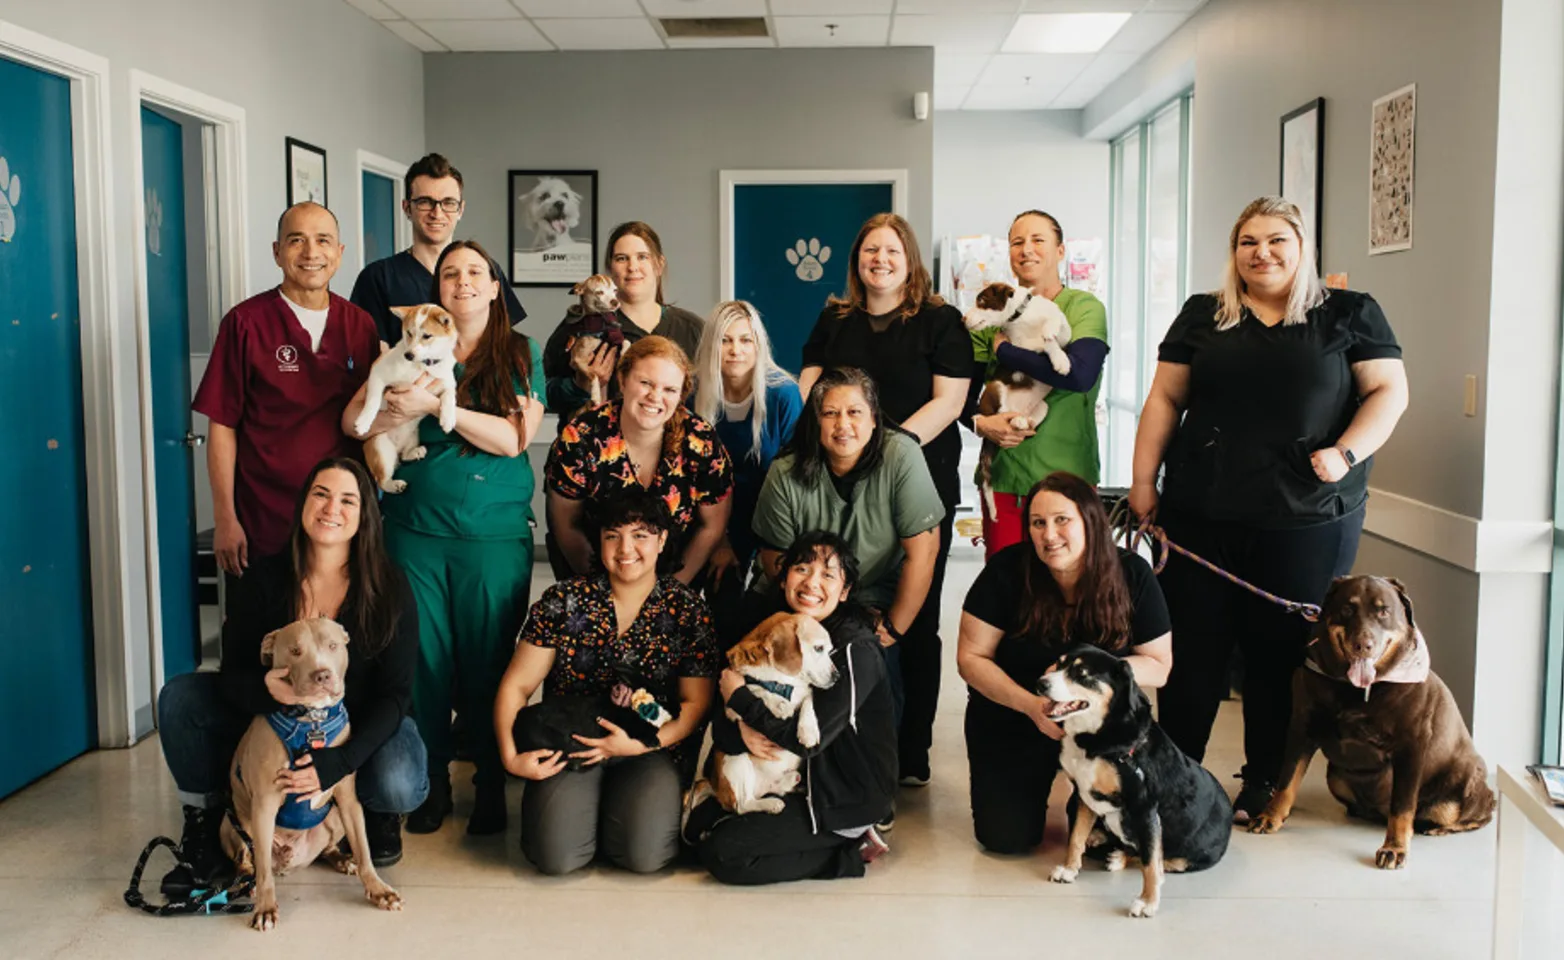 Group photo of the staff at Renton Highlands Pet Clinic